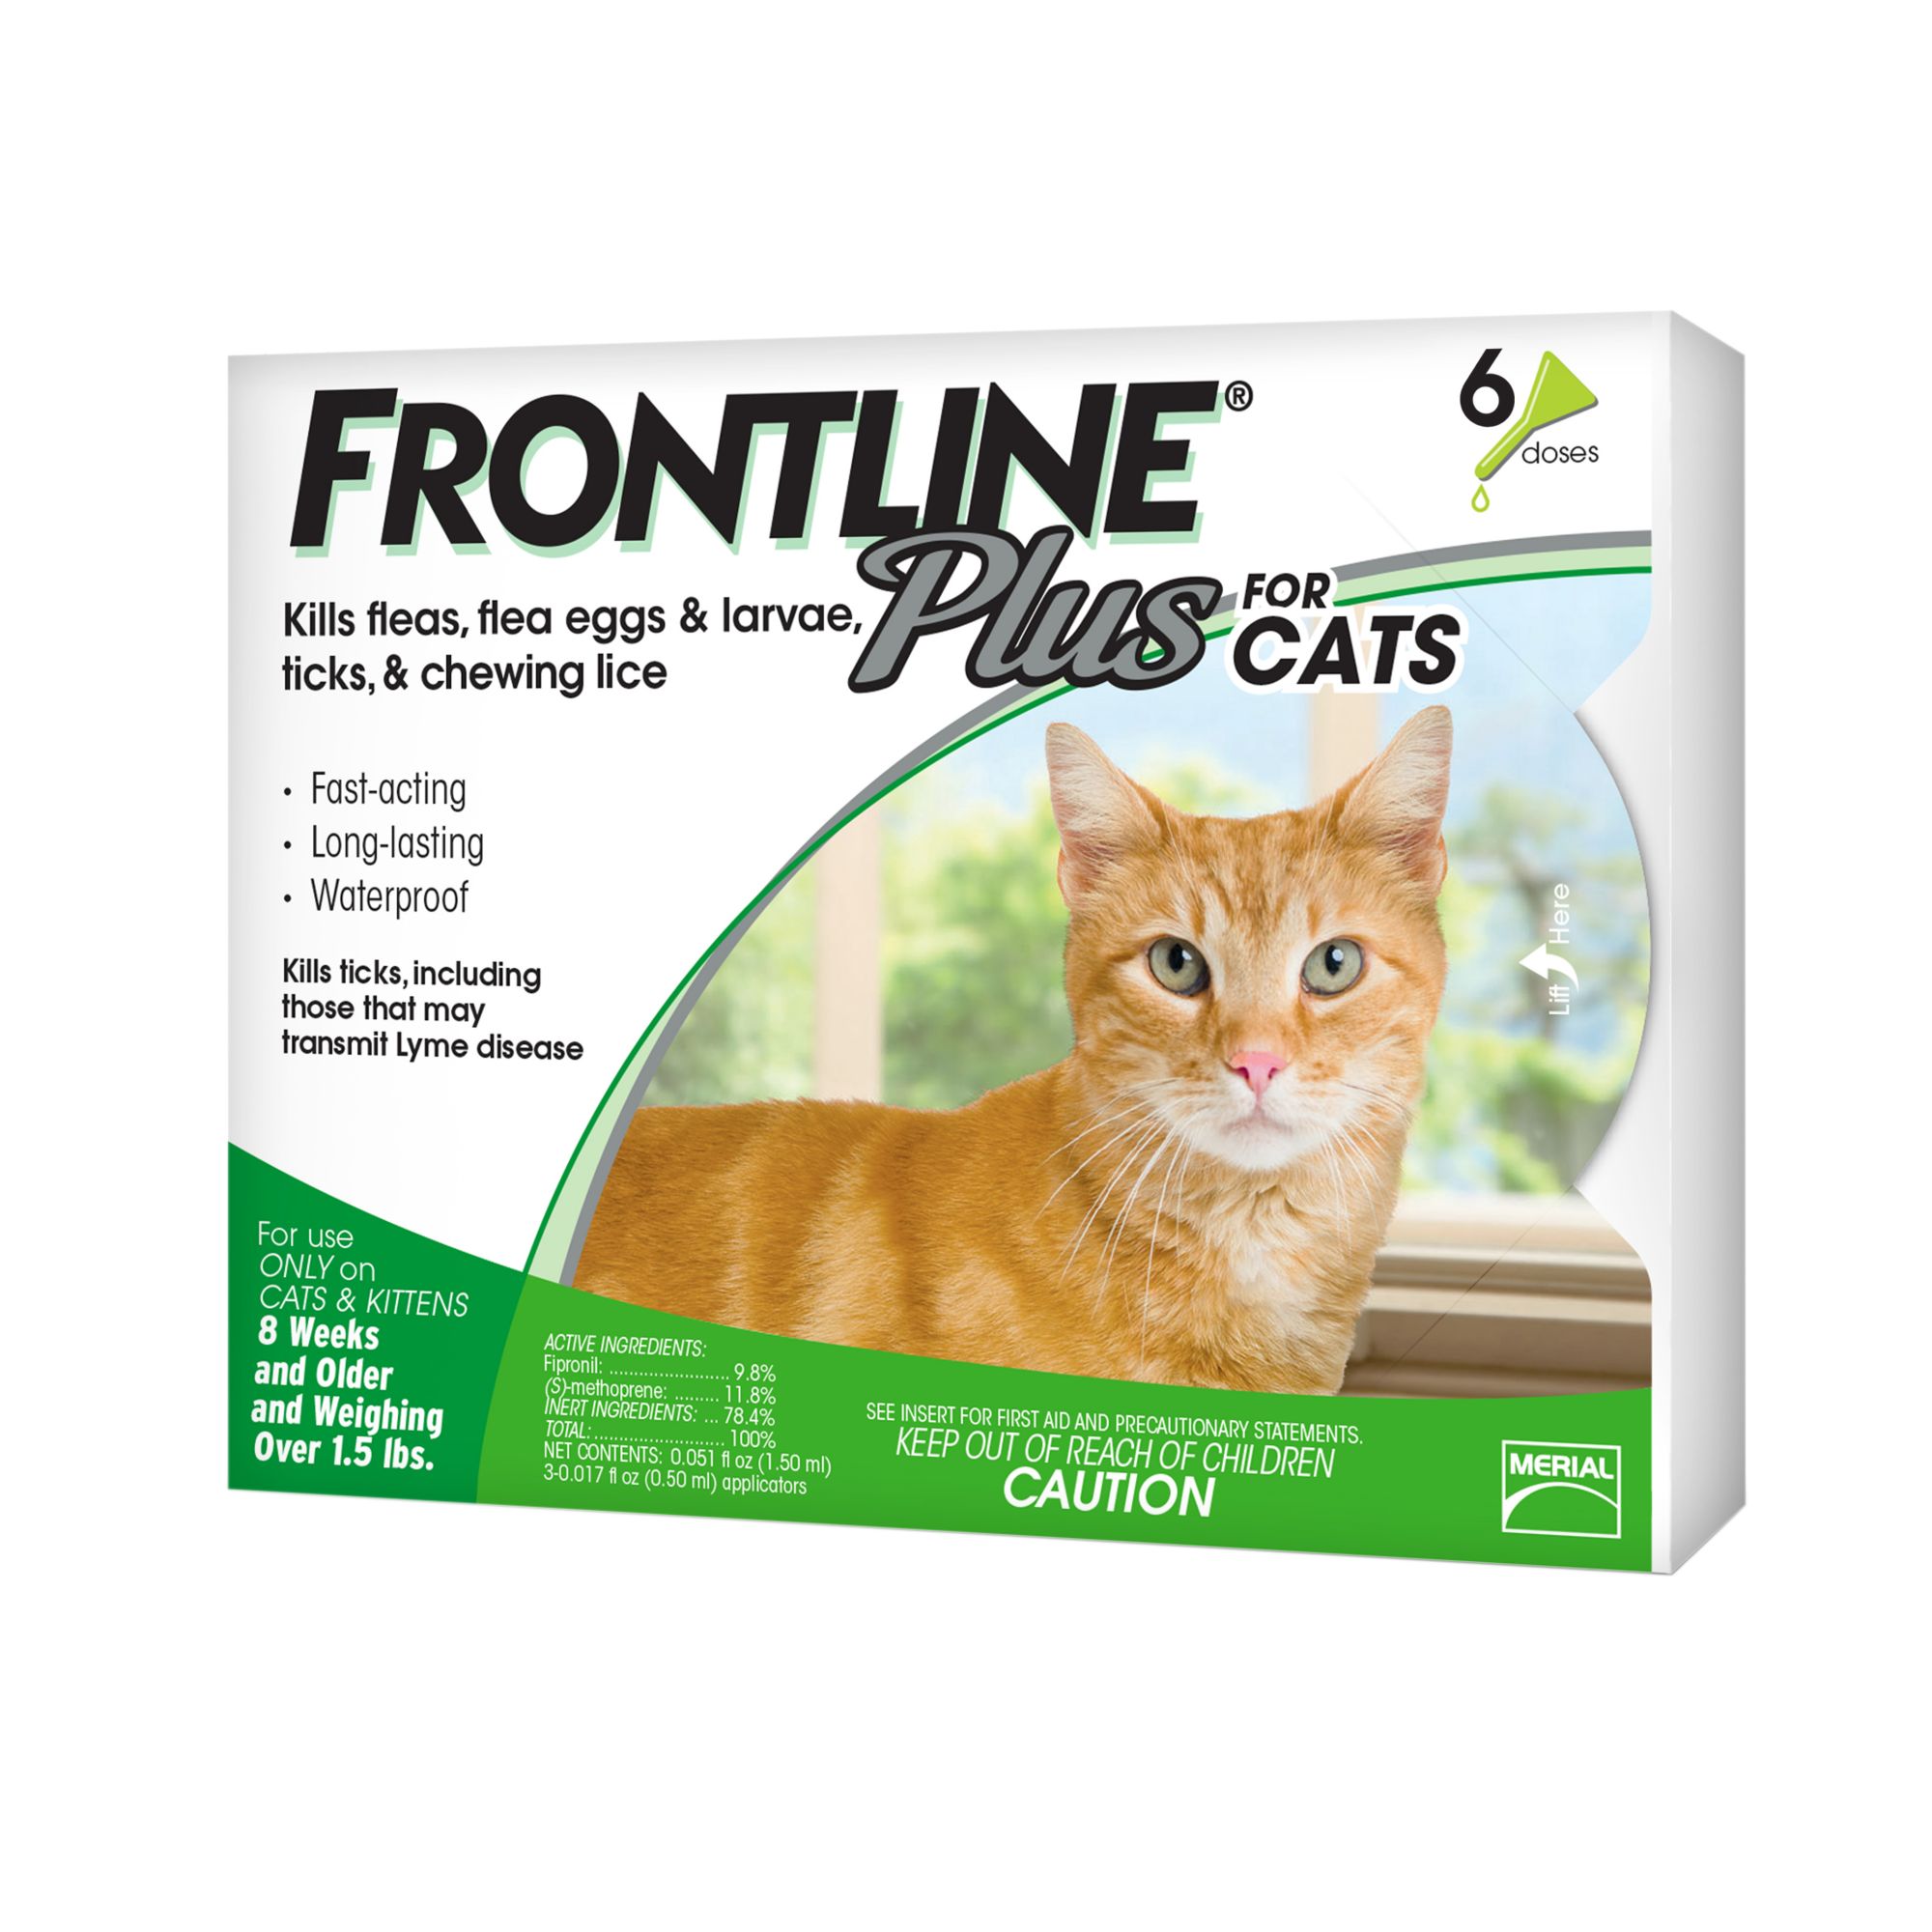 Are Dog And Cat Frontline The Same